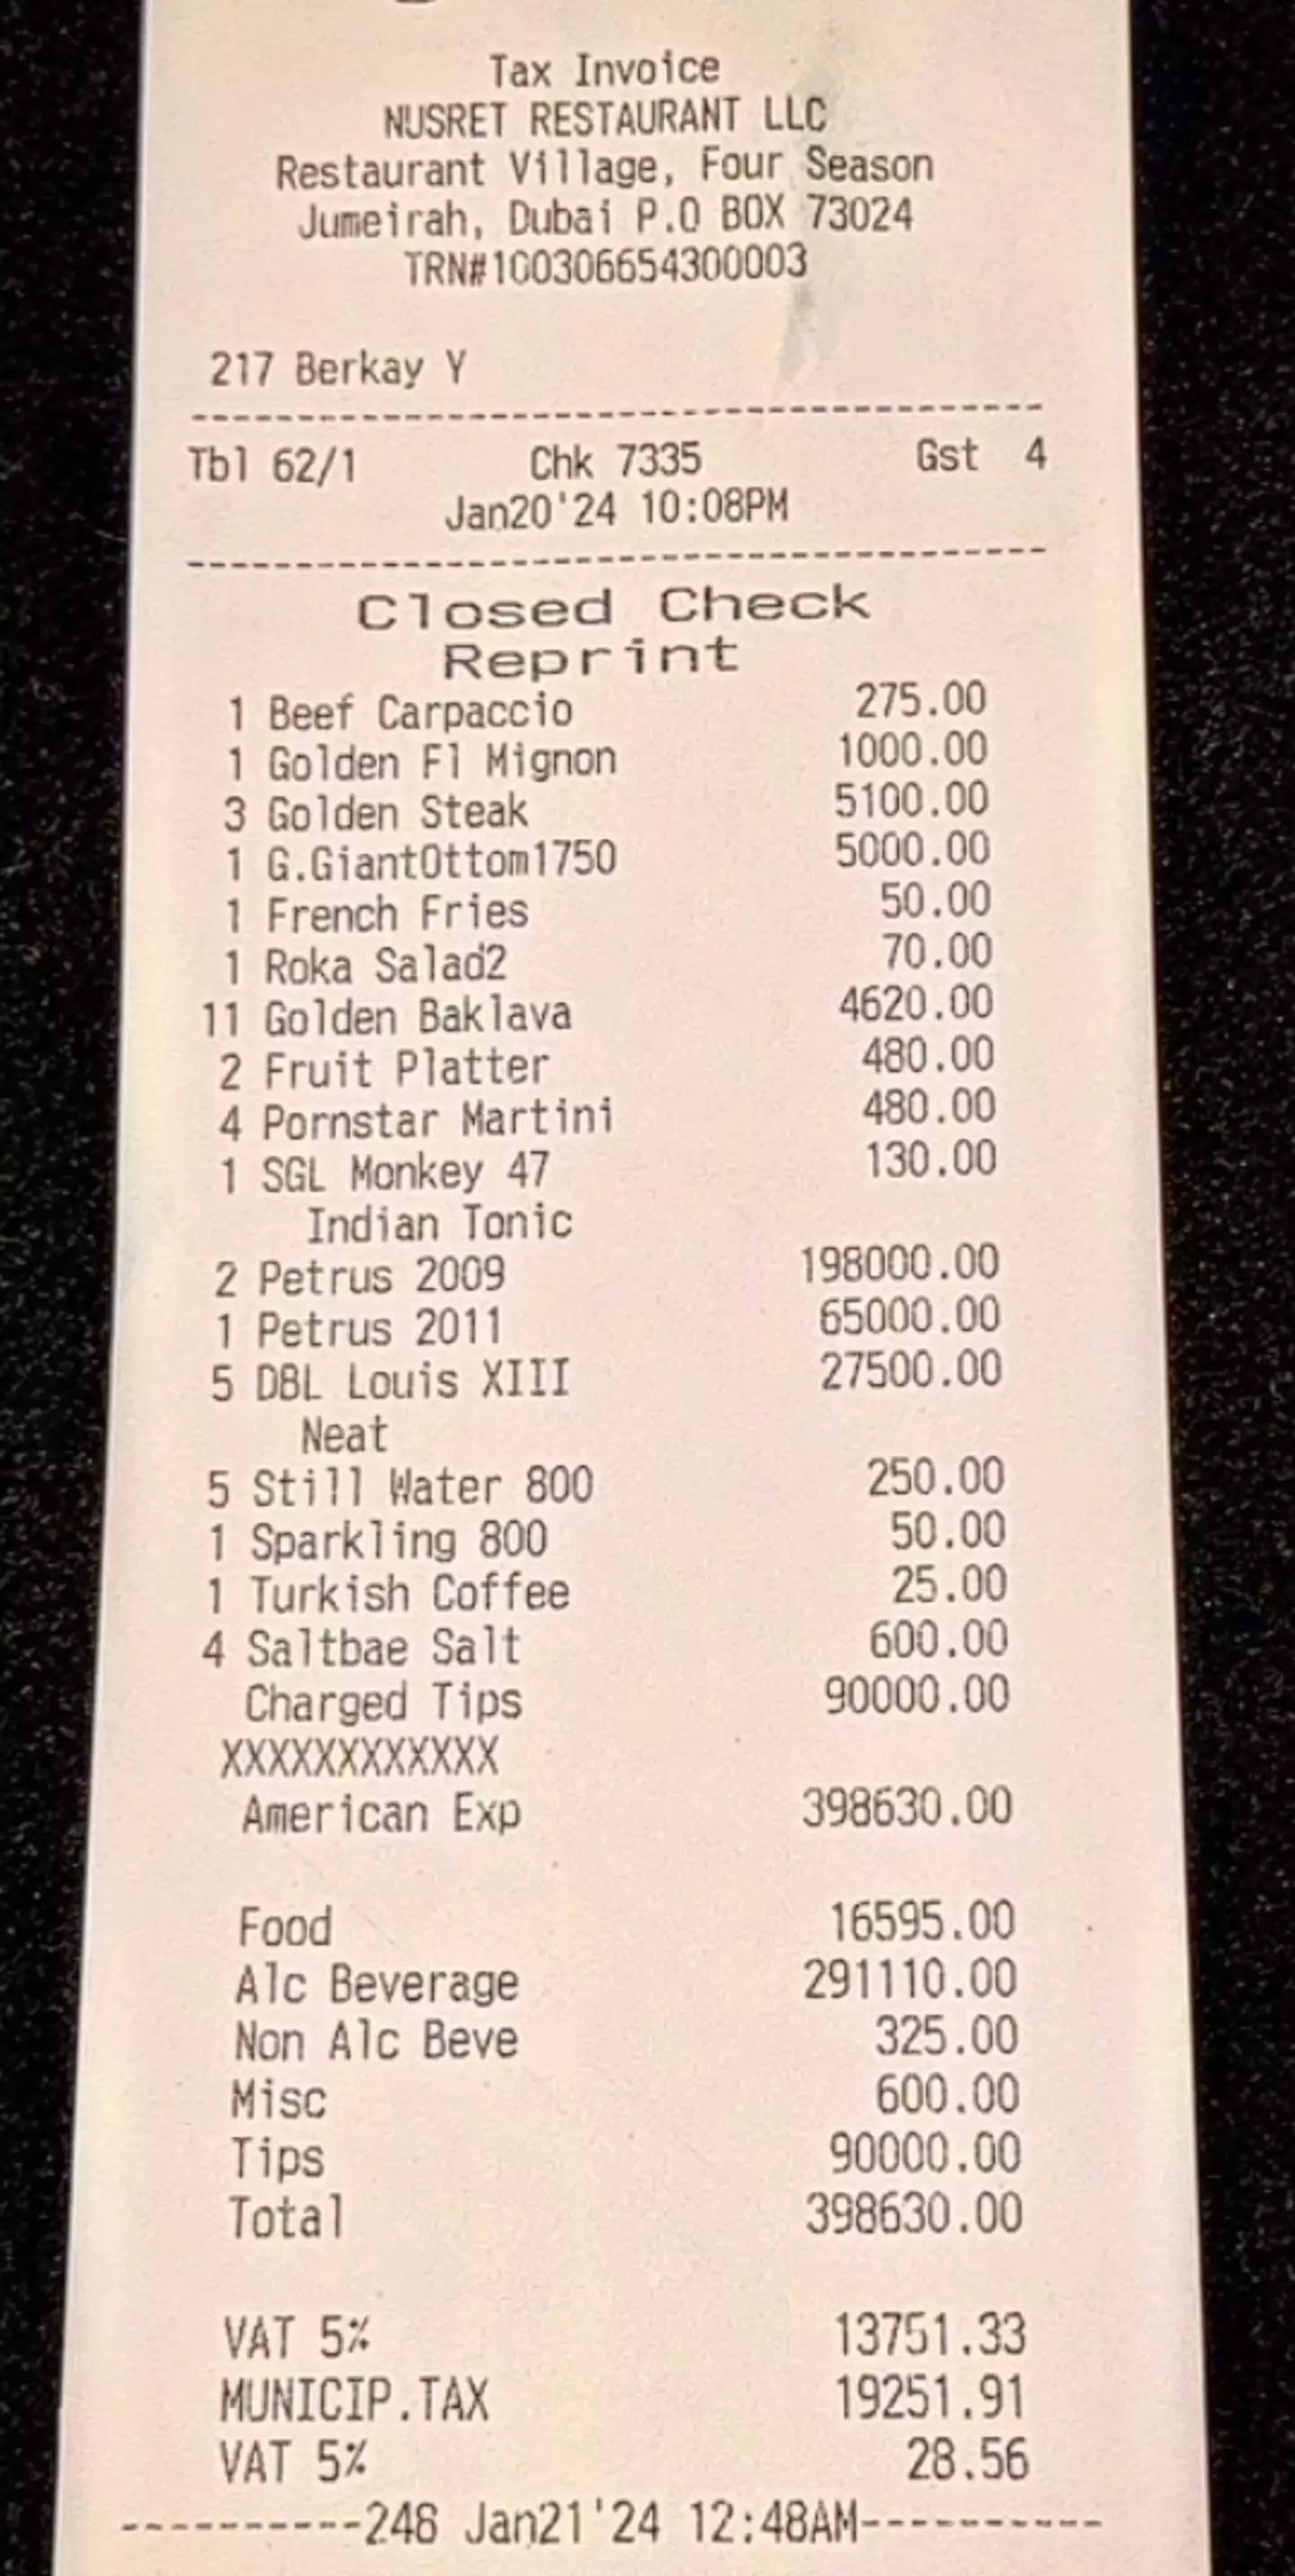 The check from the restaurant totalled $108,000.